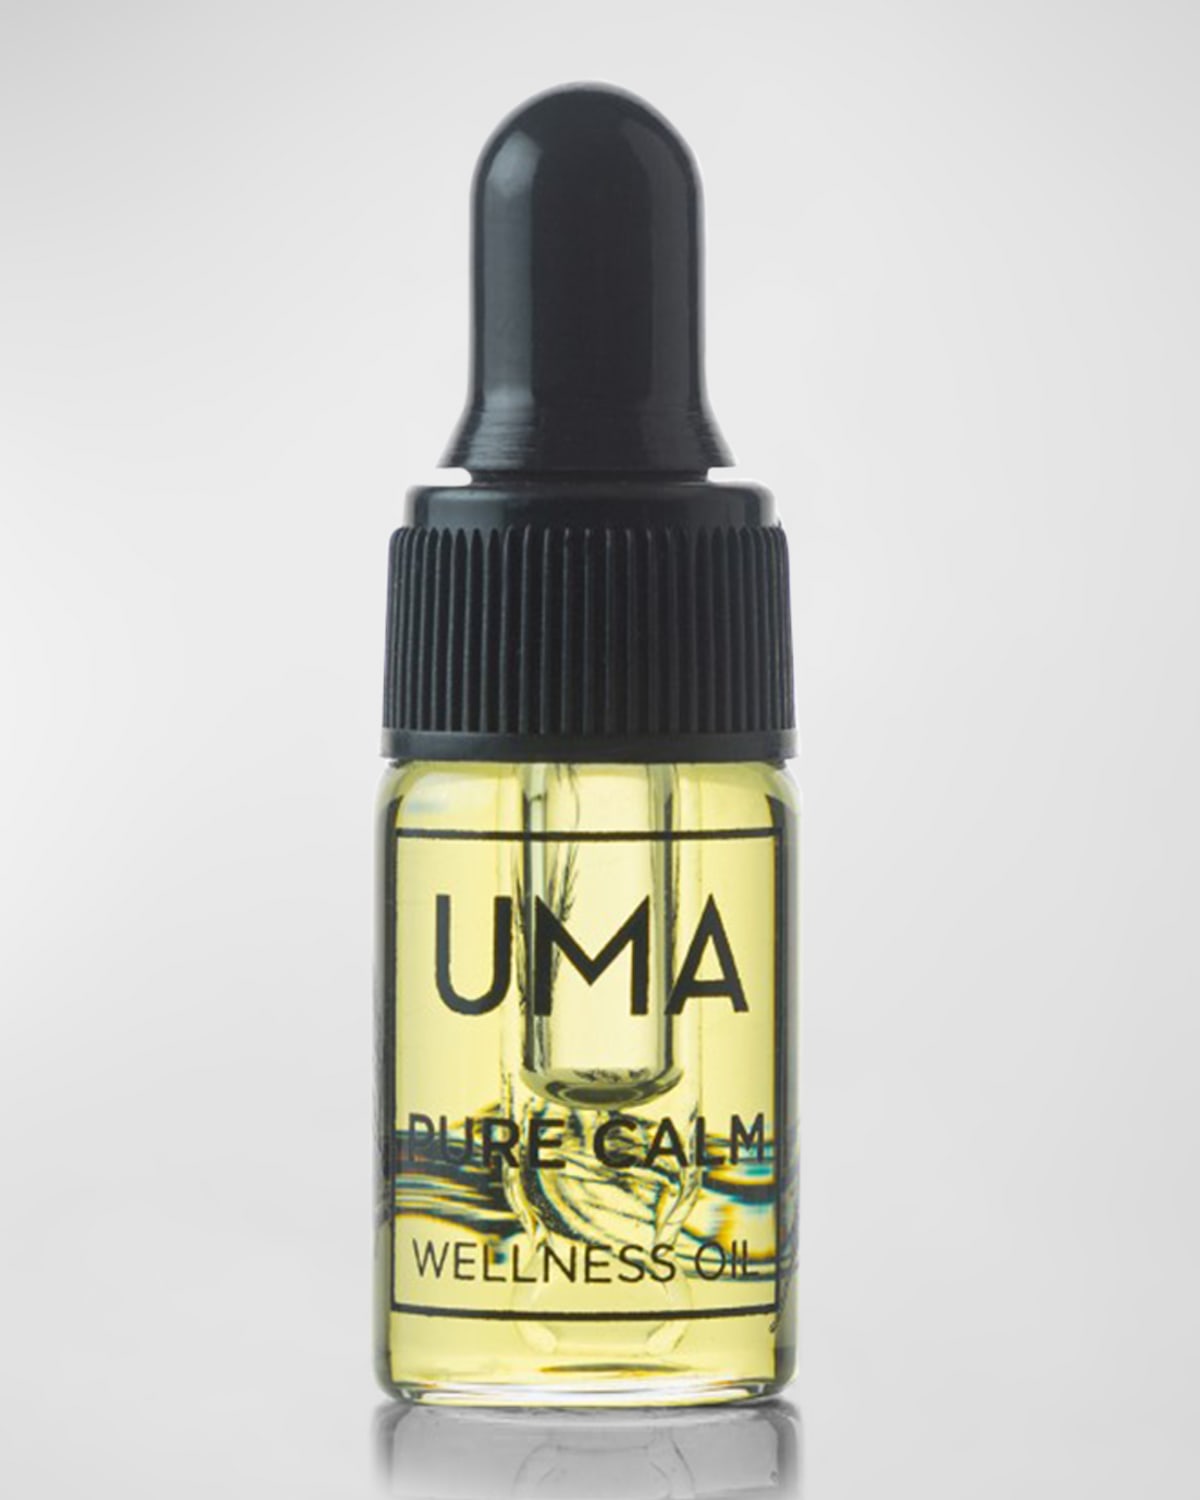 Pure Calm Wellness Oil, Yours with any $45 UMA Oils Purchase